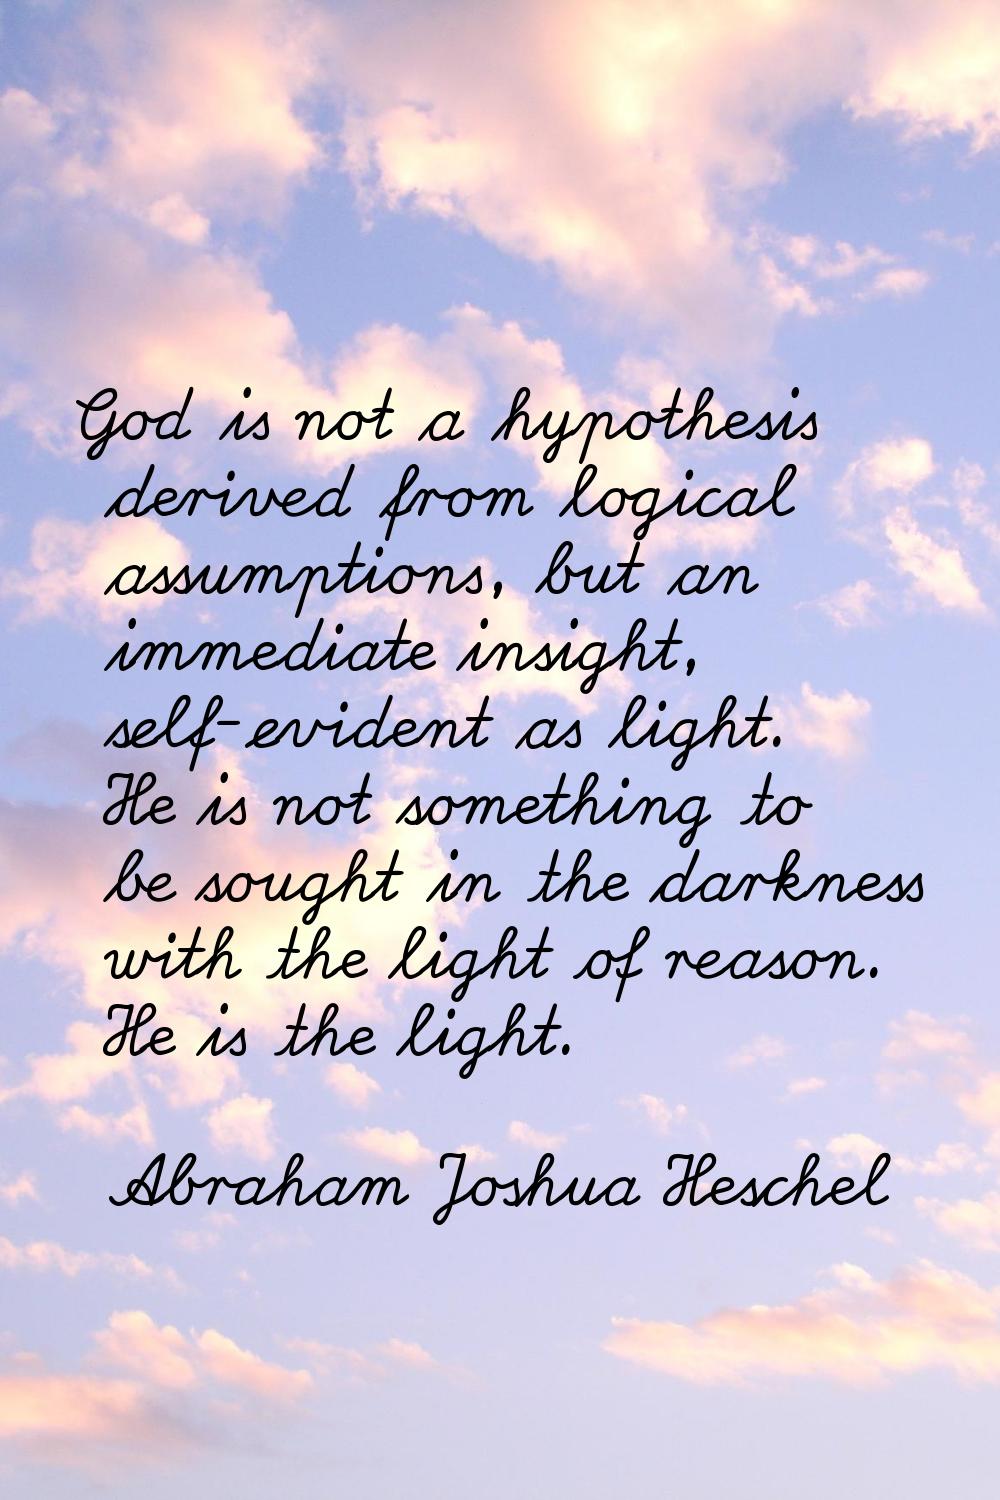 God is not a hypothesis derived from logical assumptions, but an immediate insight, self-evident as